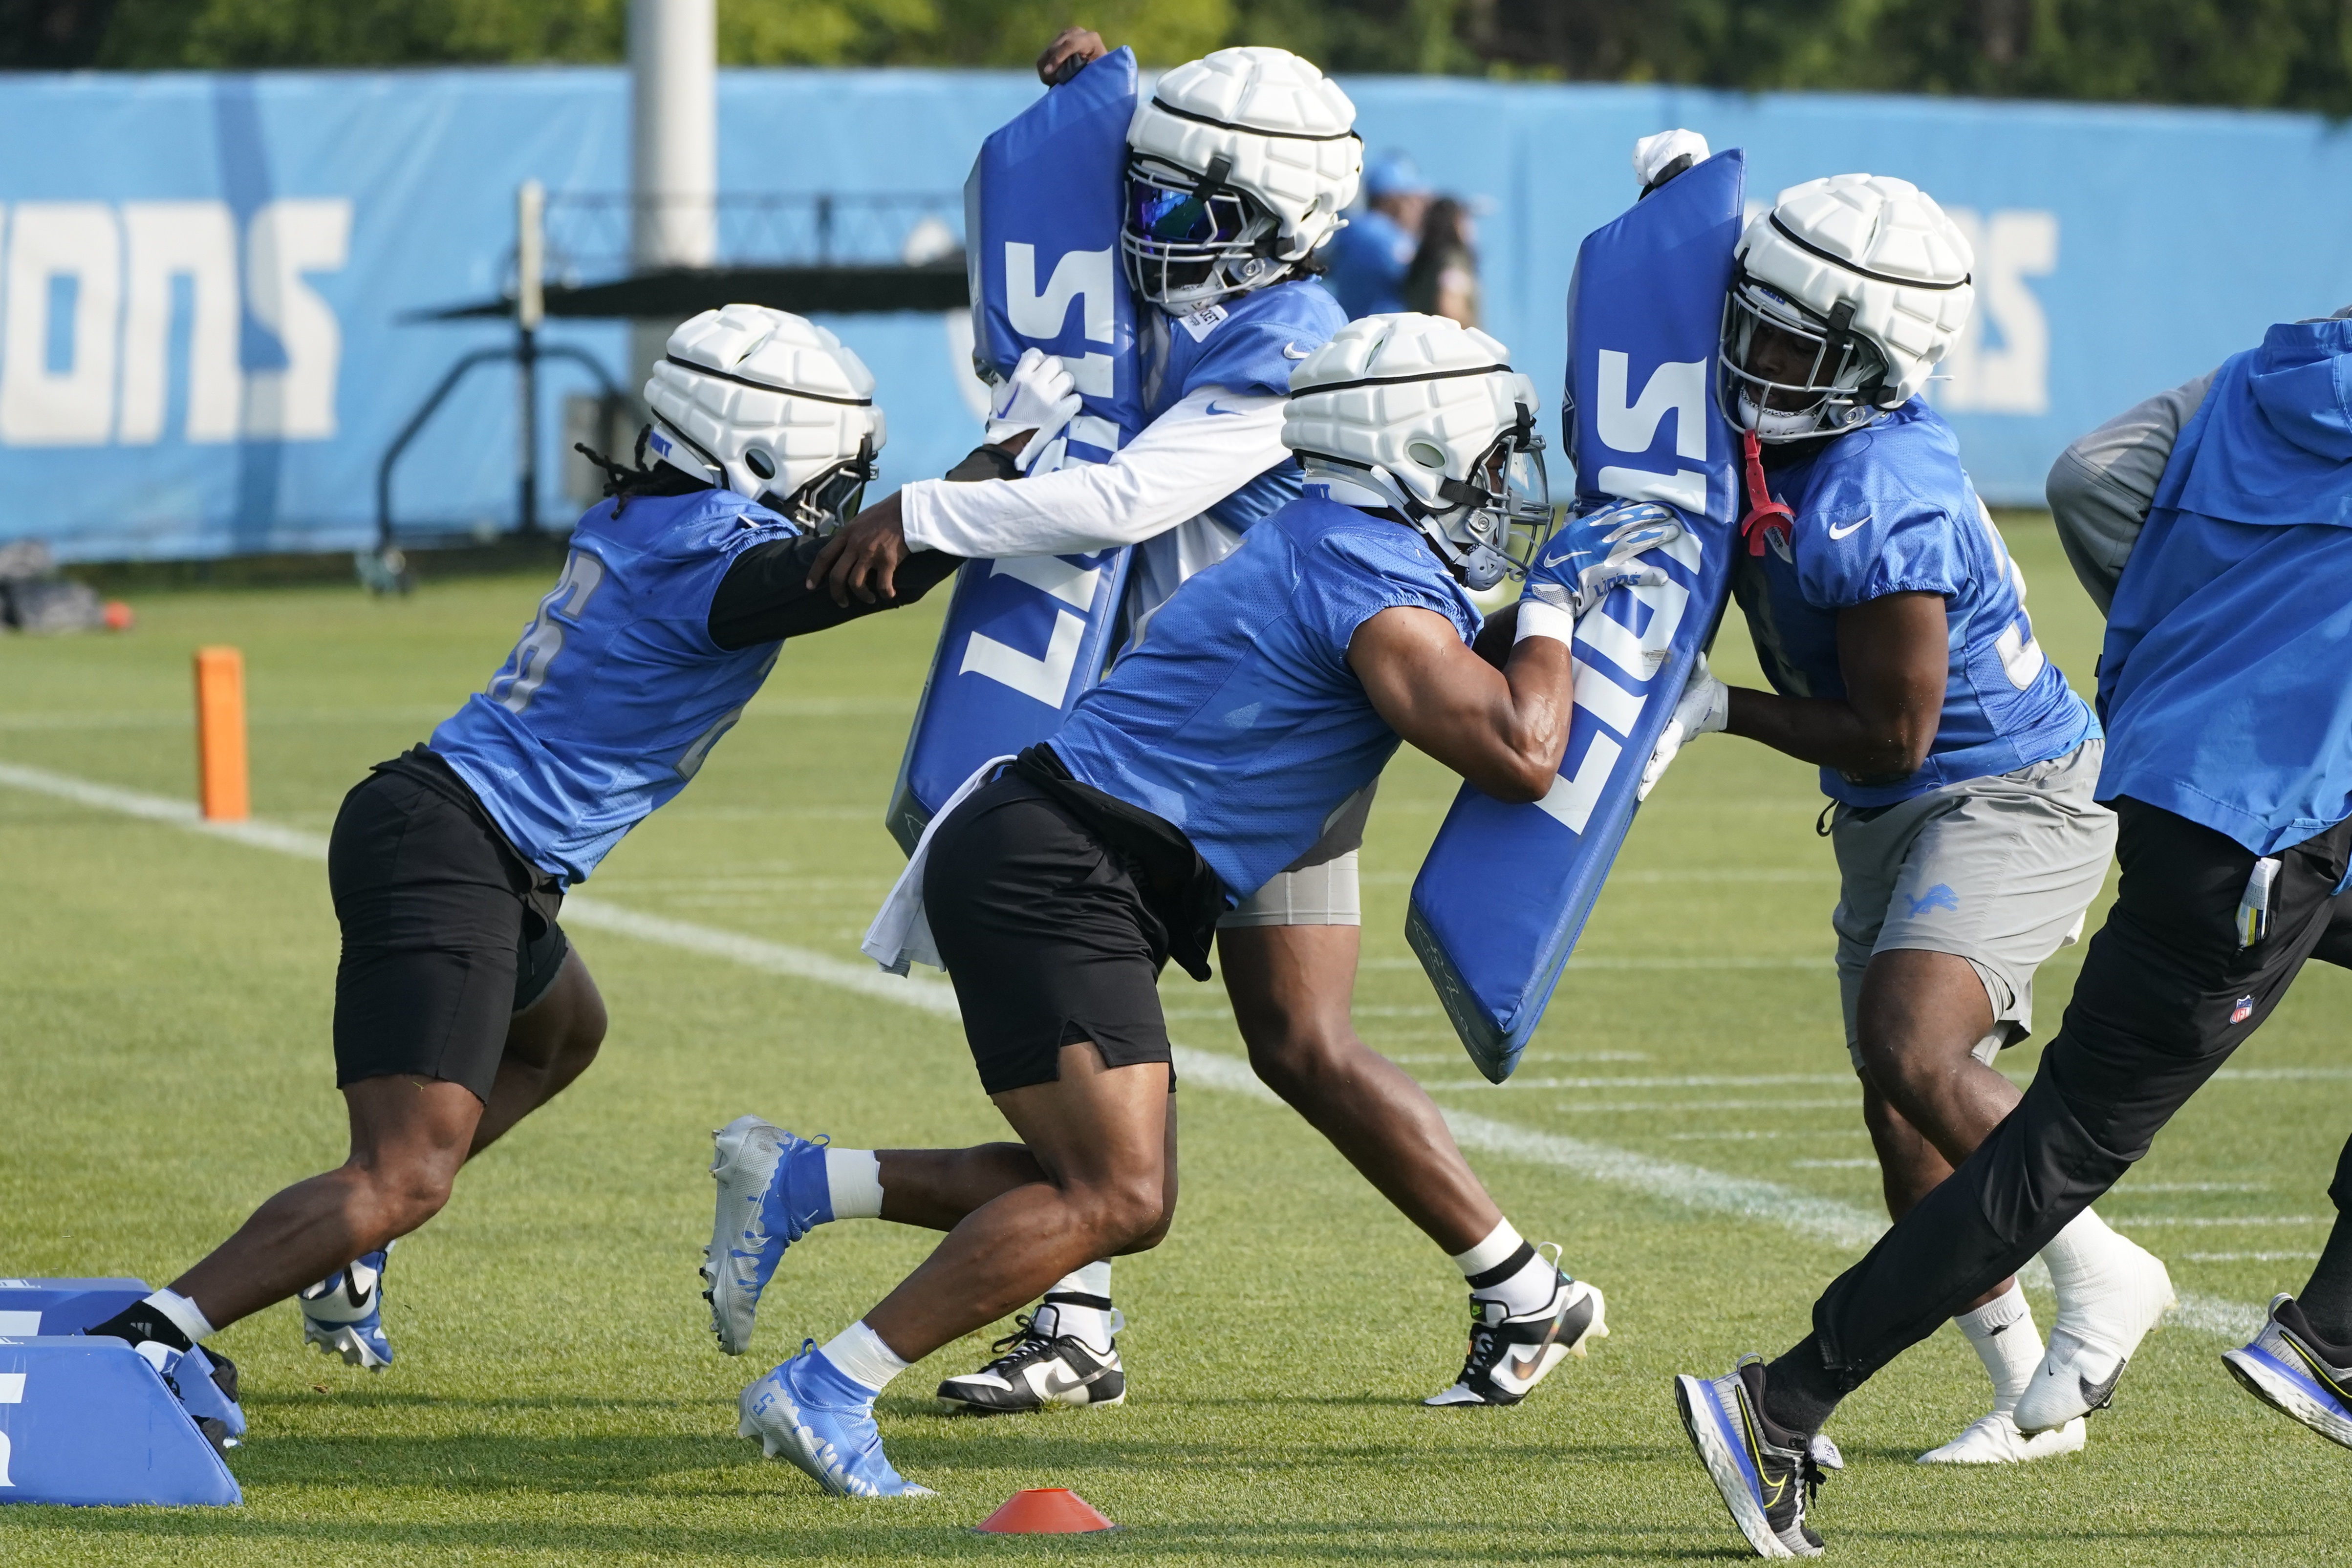 Lions' bolstered linebacking corps has high expectations on 1st day of pads  at training camp